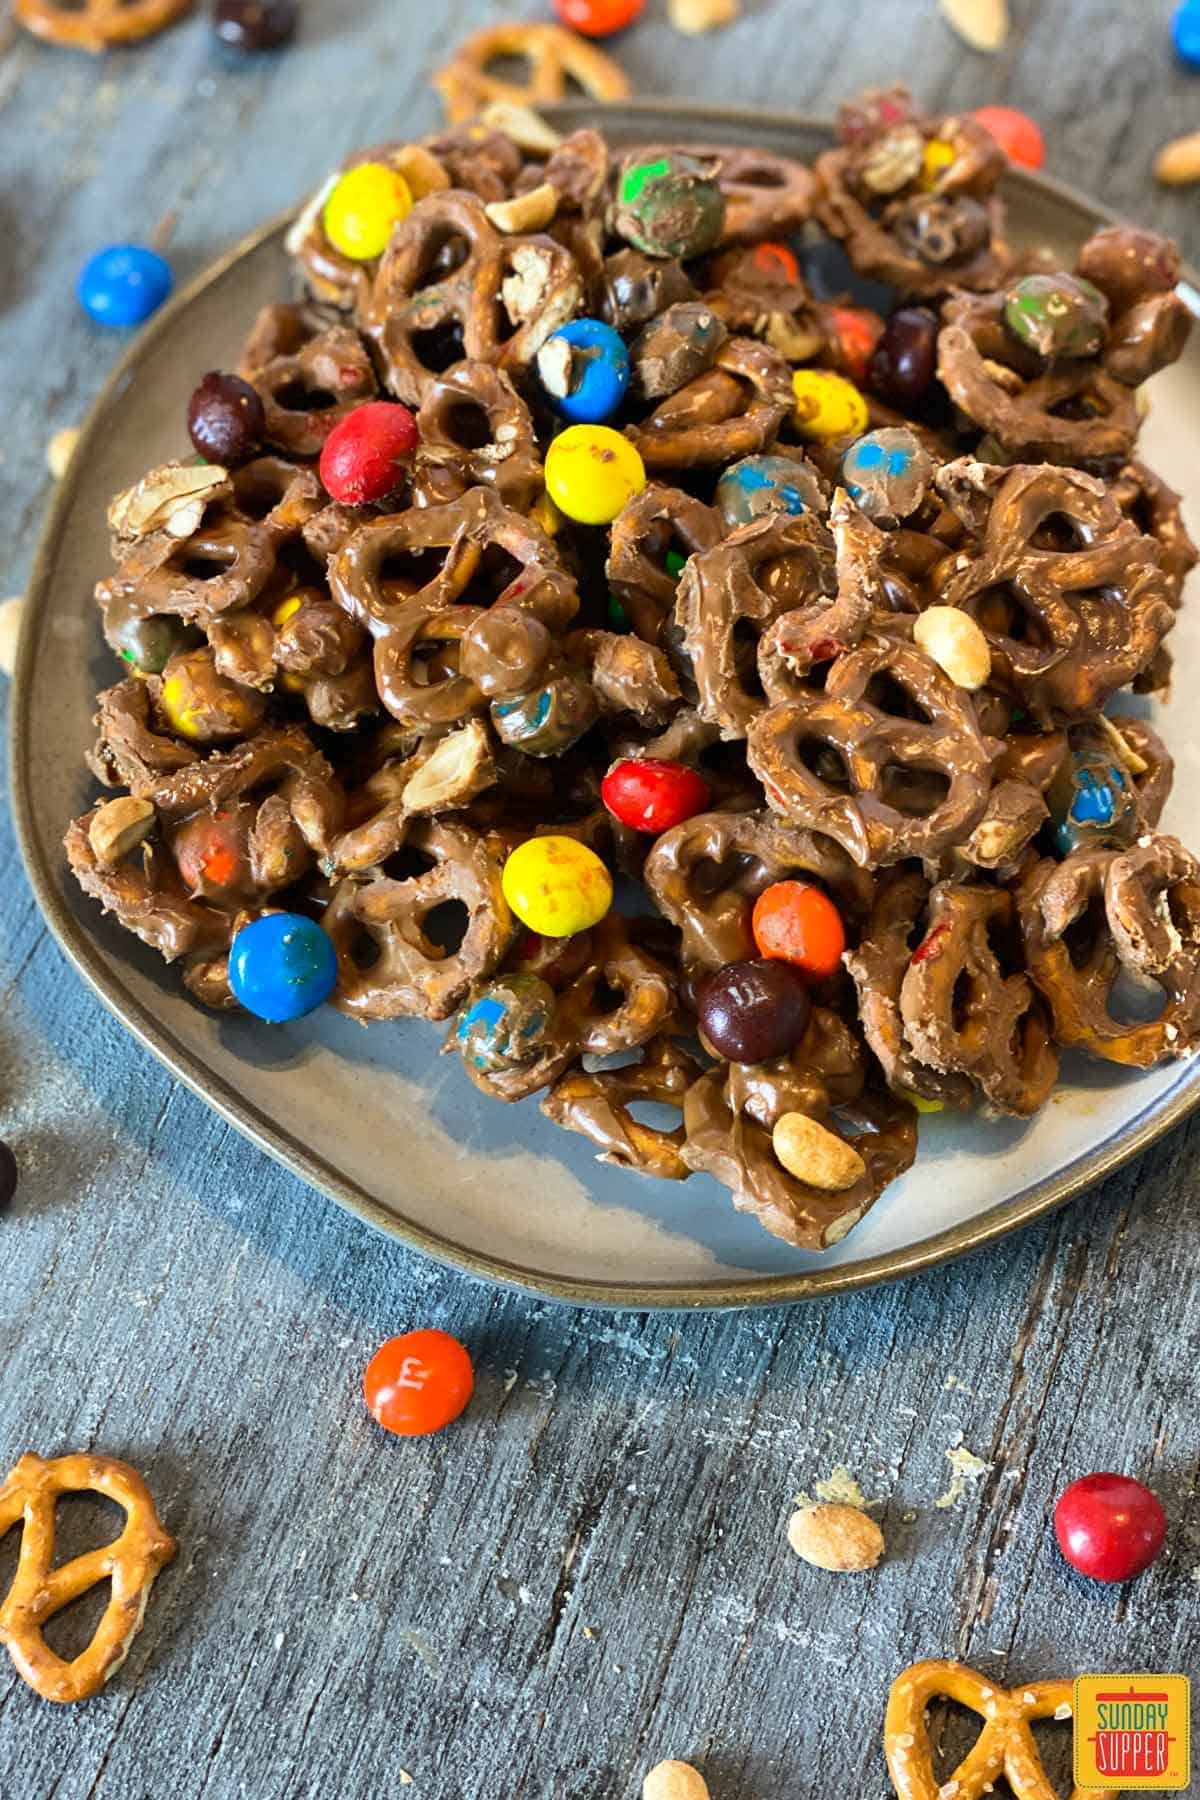 A plate with chocolate peanut butter M&Ms snack mix